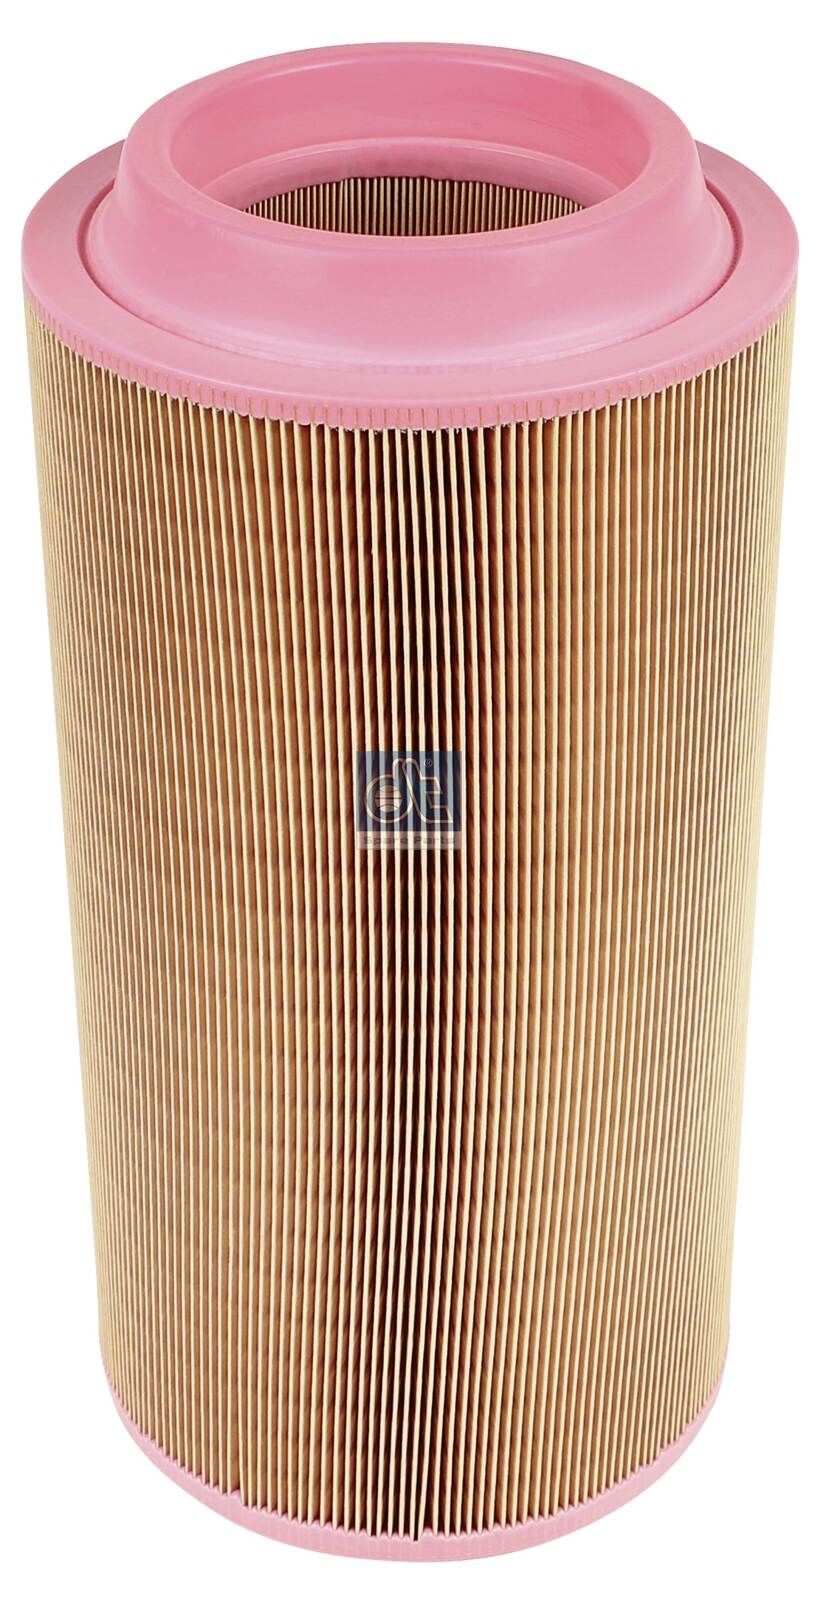 C 20 500 DT Spare Parts 4.65866 Air filter 222-9020